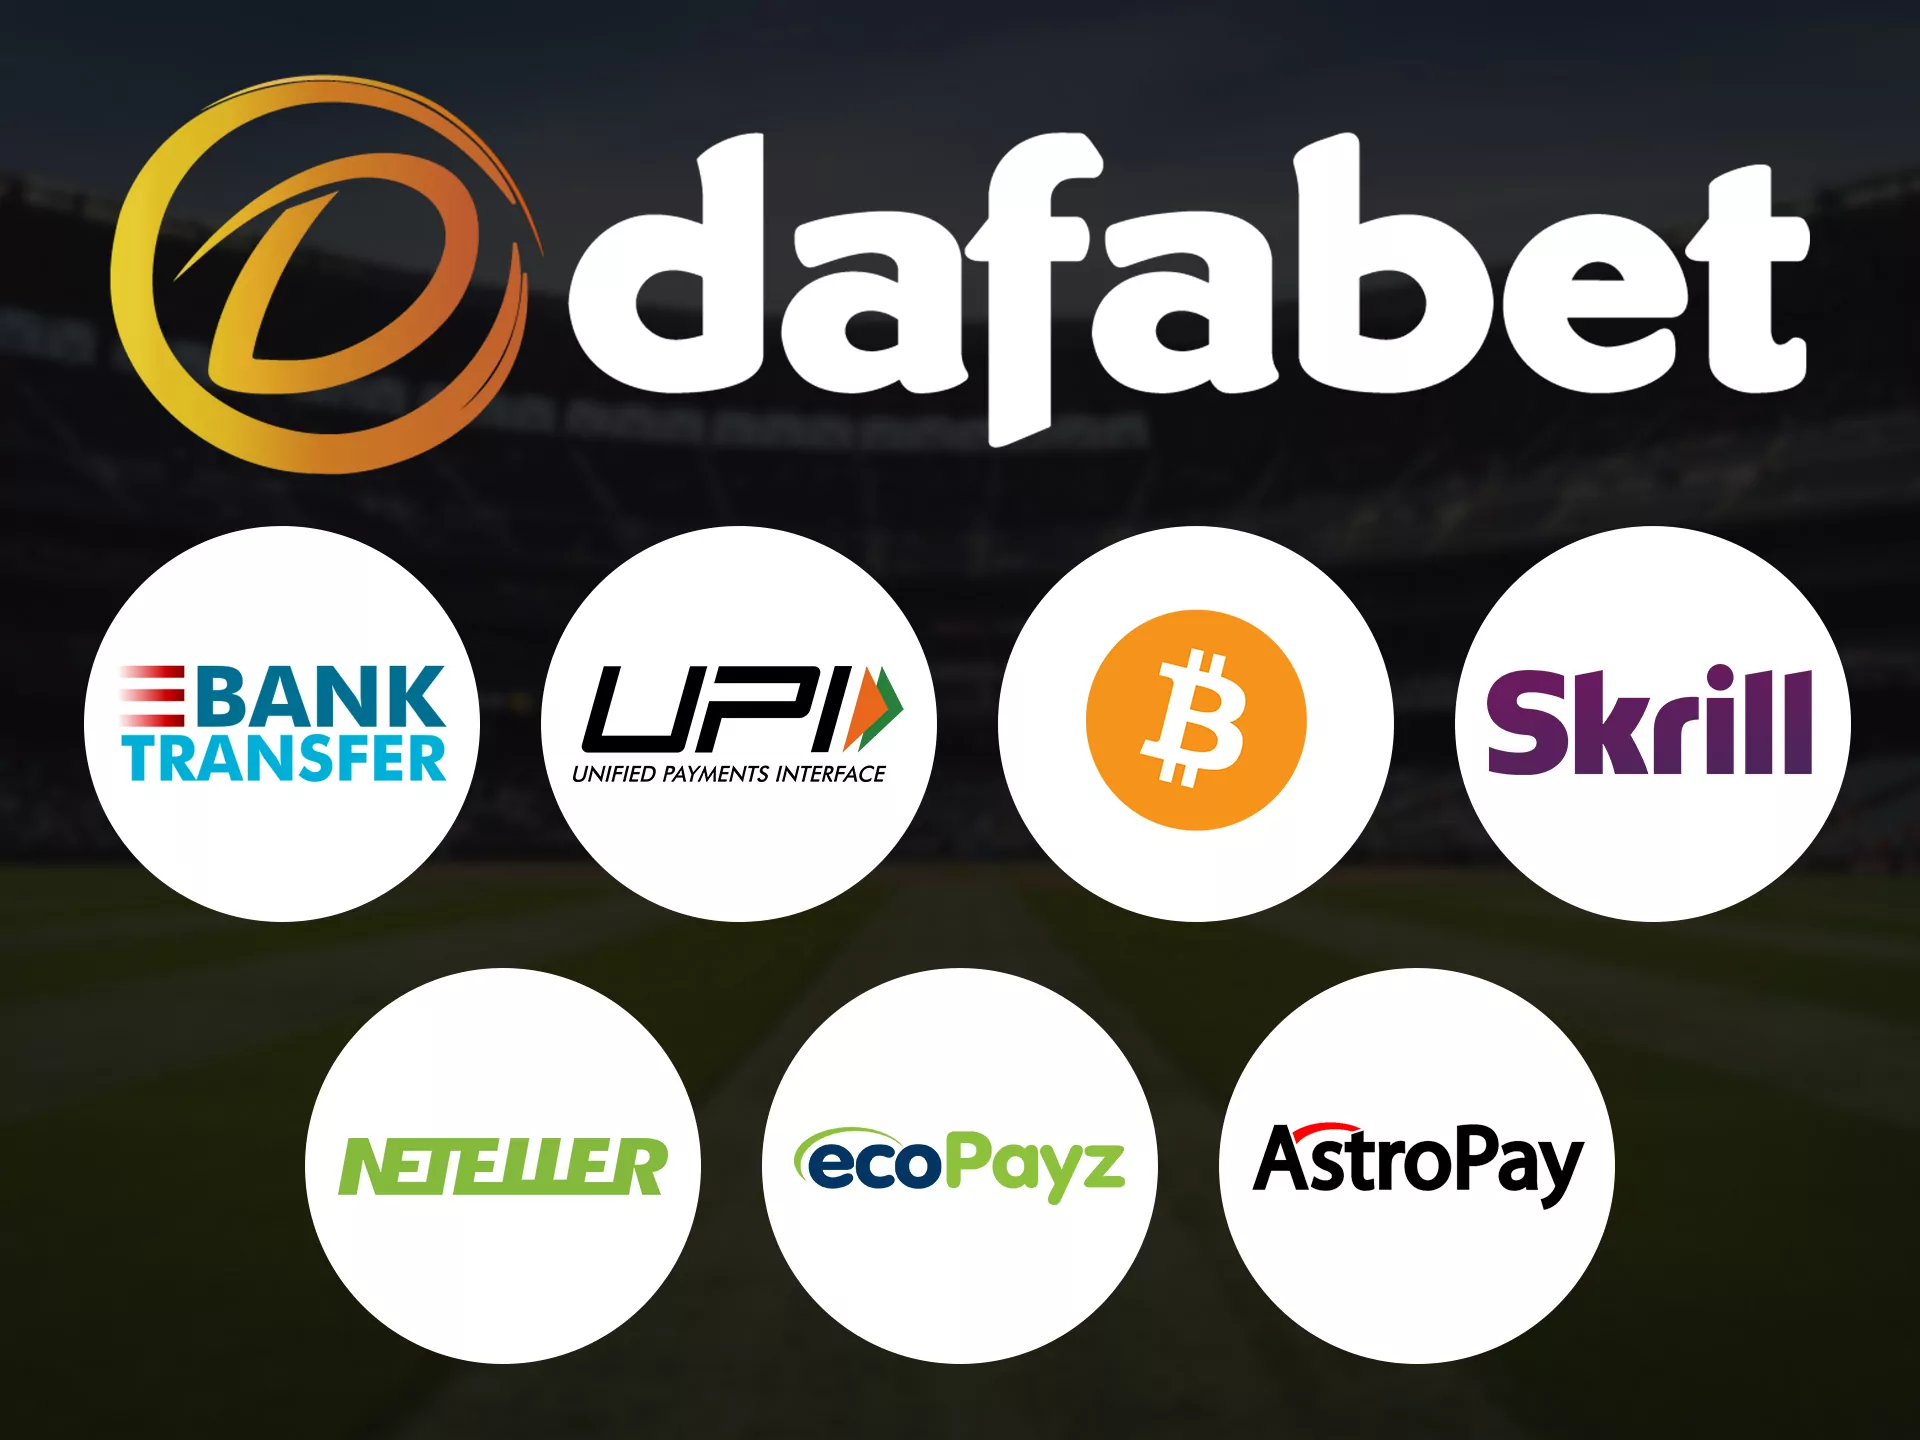 Dafabet allow you pay with different methods.